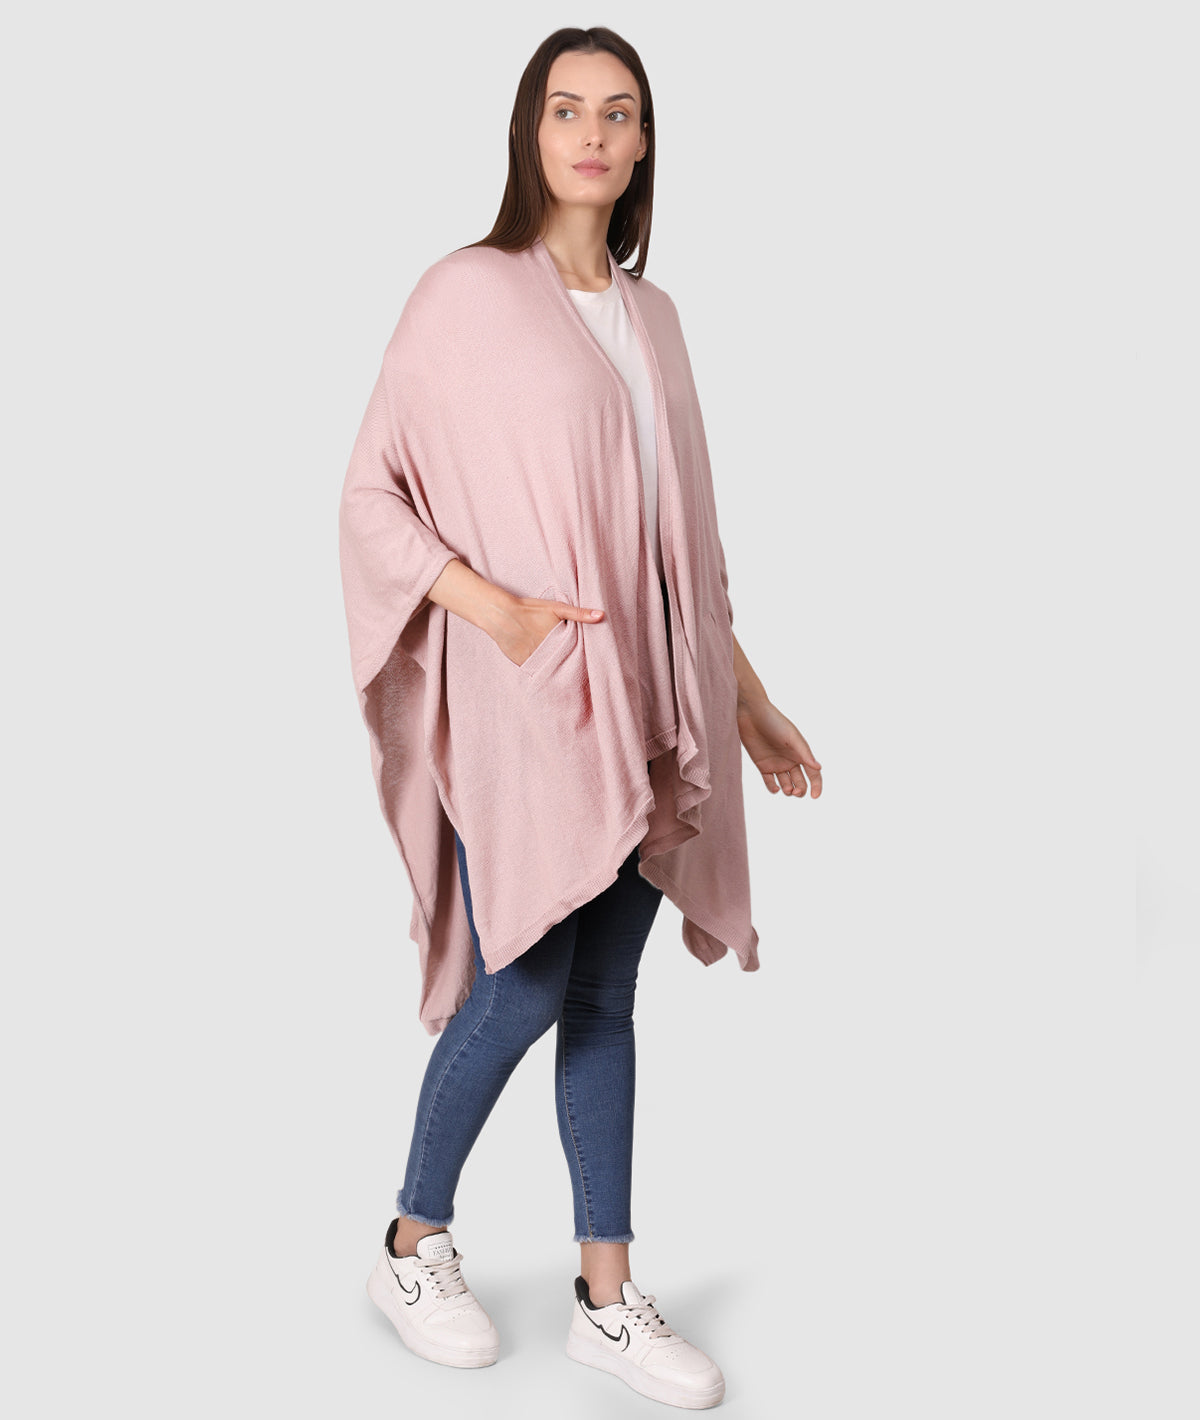 Classic Travel Wrap - Organic Cotton Knitted Light Weight Wrap in Pouch (Cameo Pink)